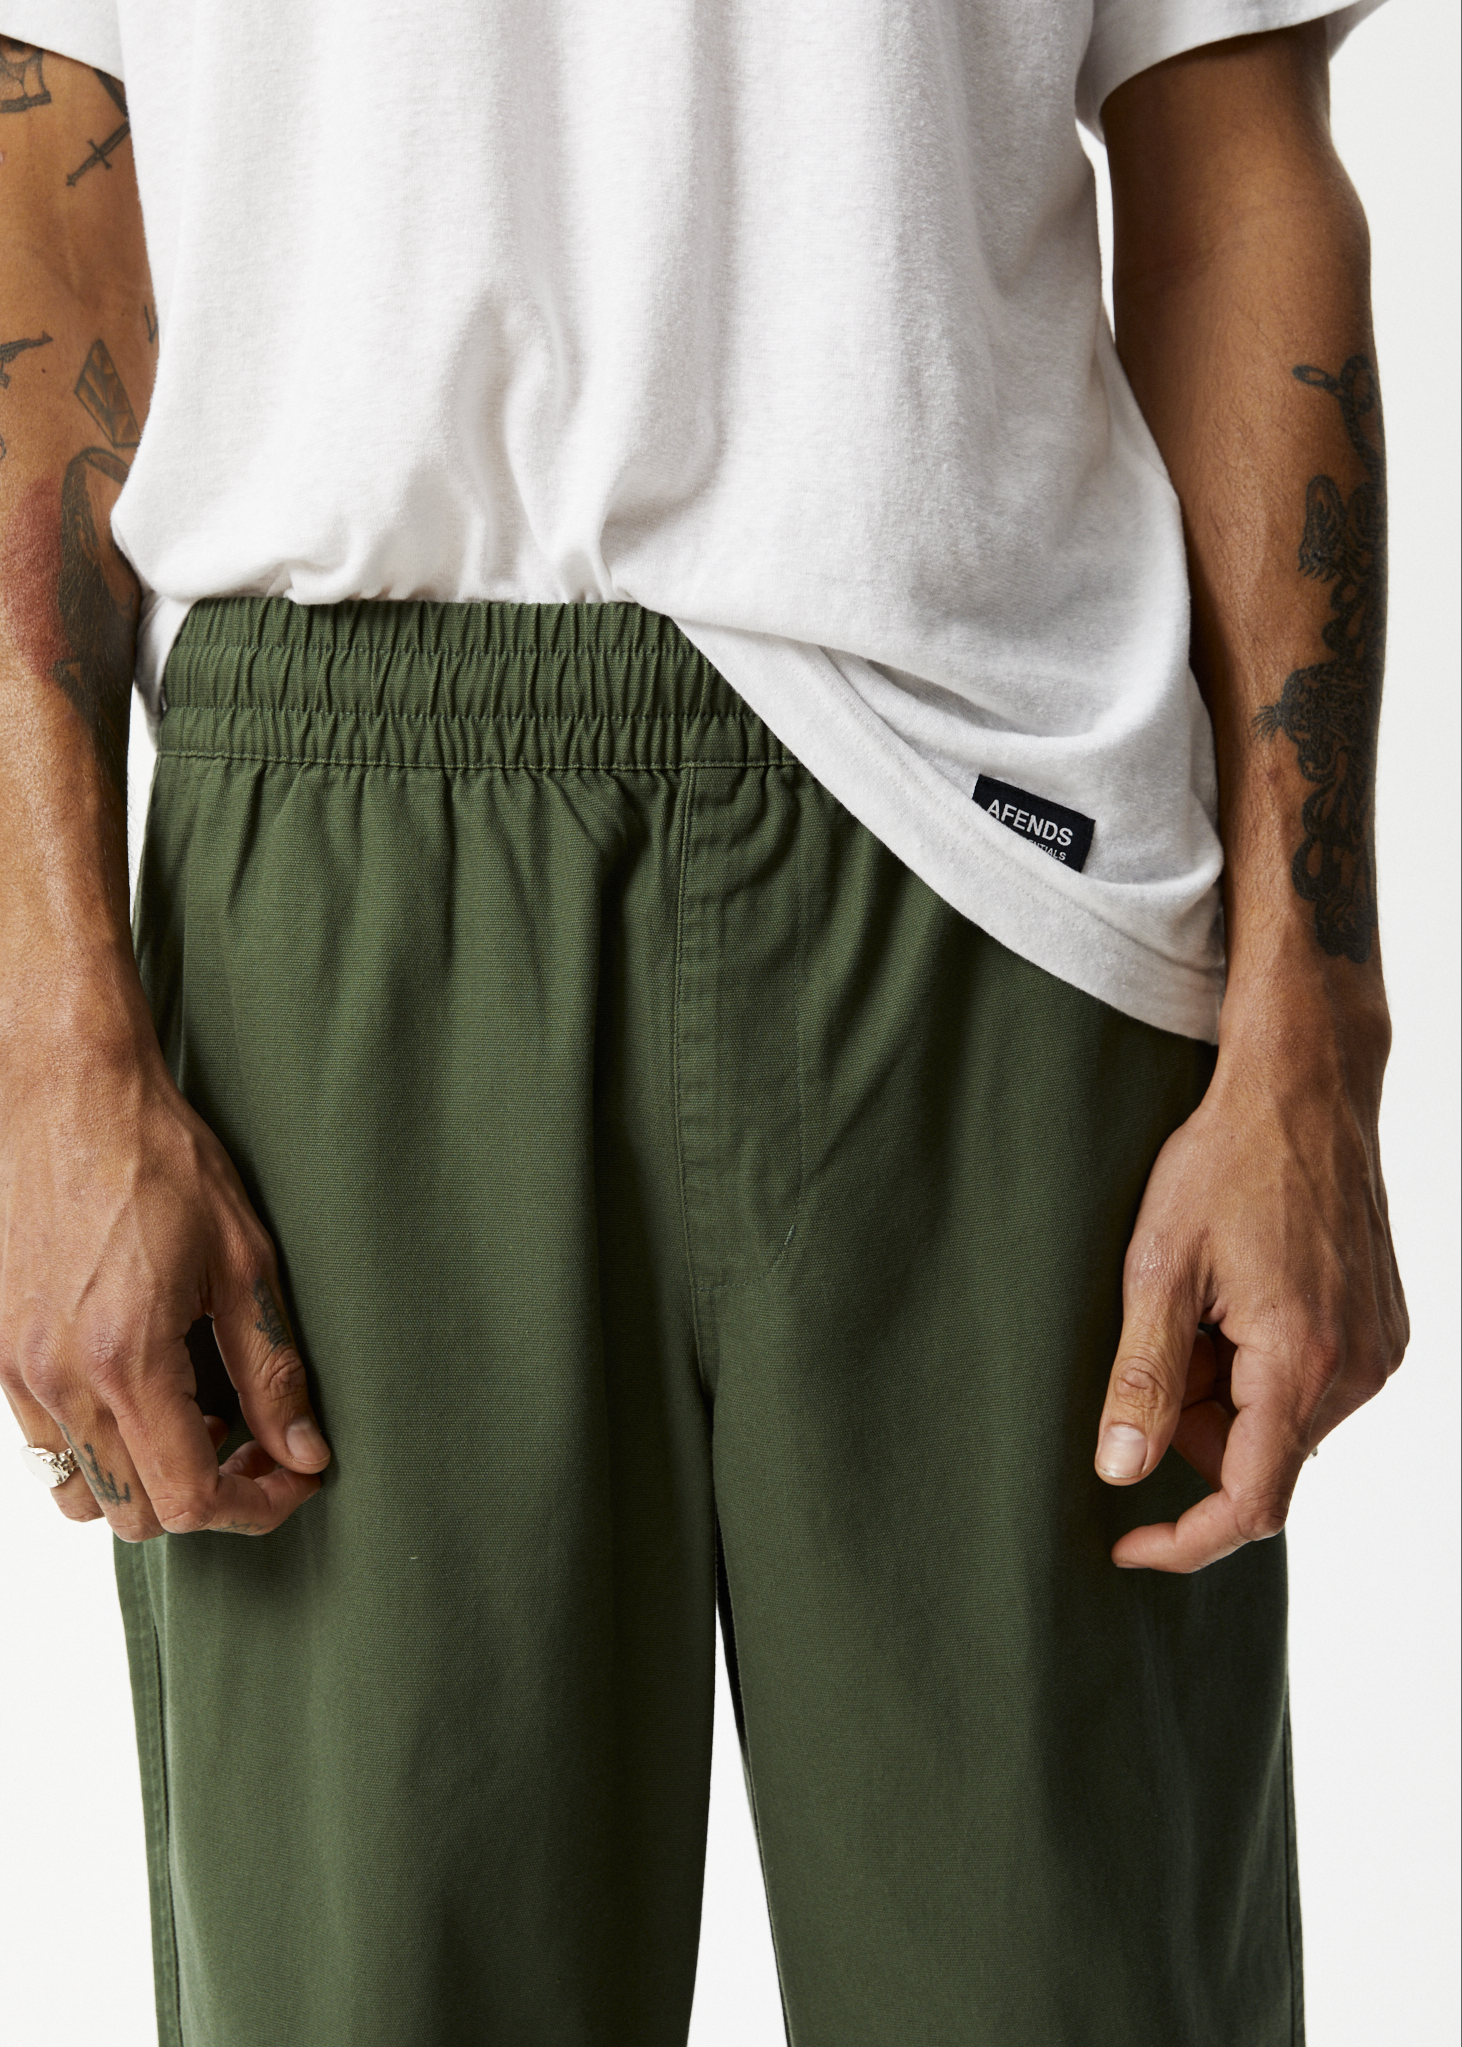 Afends Mens Ninety Eights - Recycled Baggy Elastic Waist Pants - Cypress 